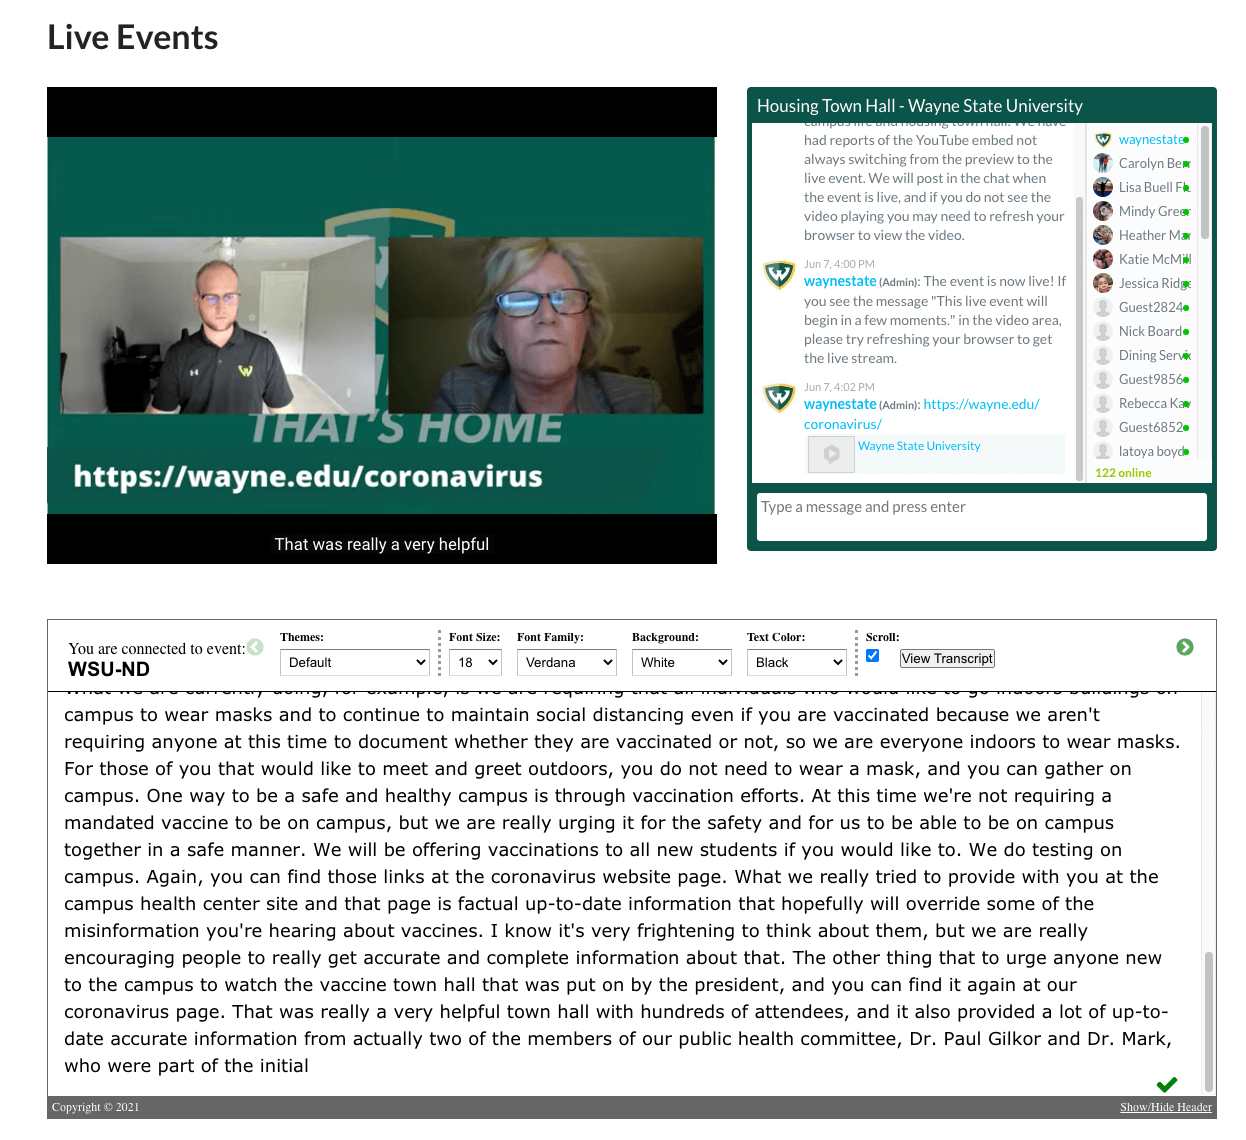 Screenshot of web page with a YouTube embed, live chat and closed cpaptions